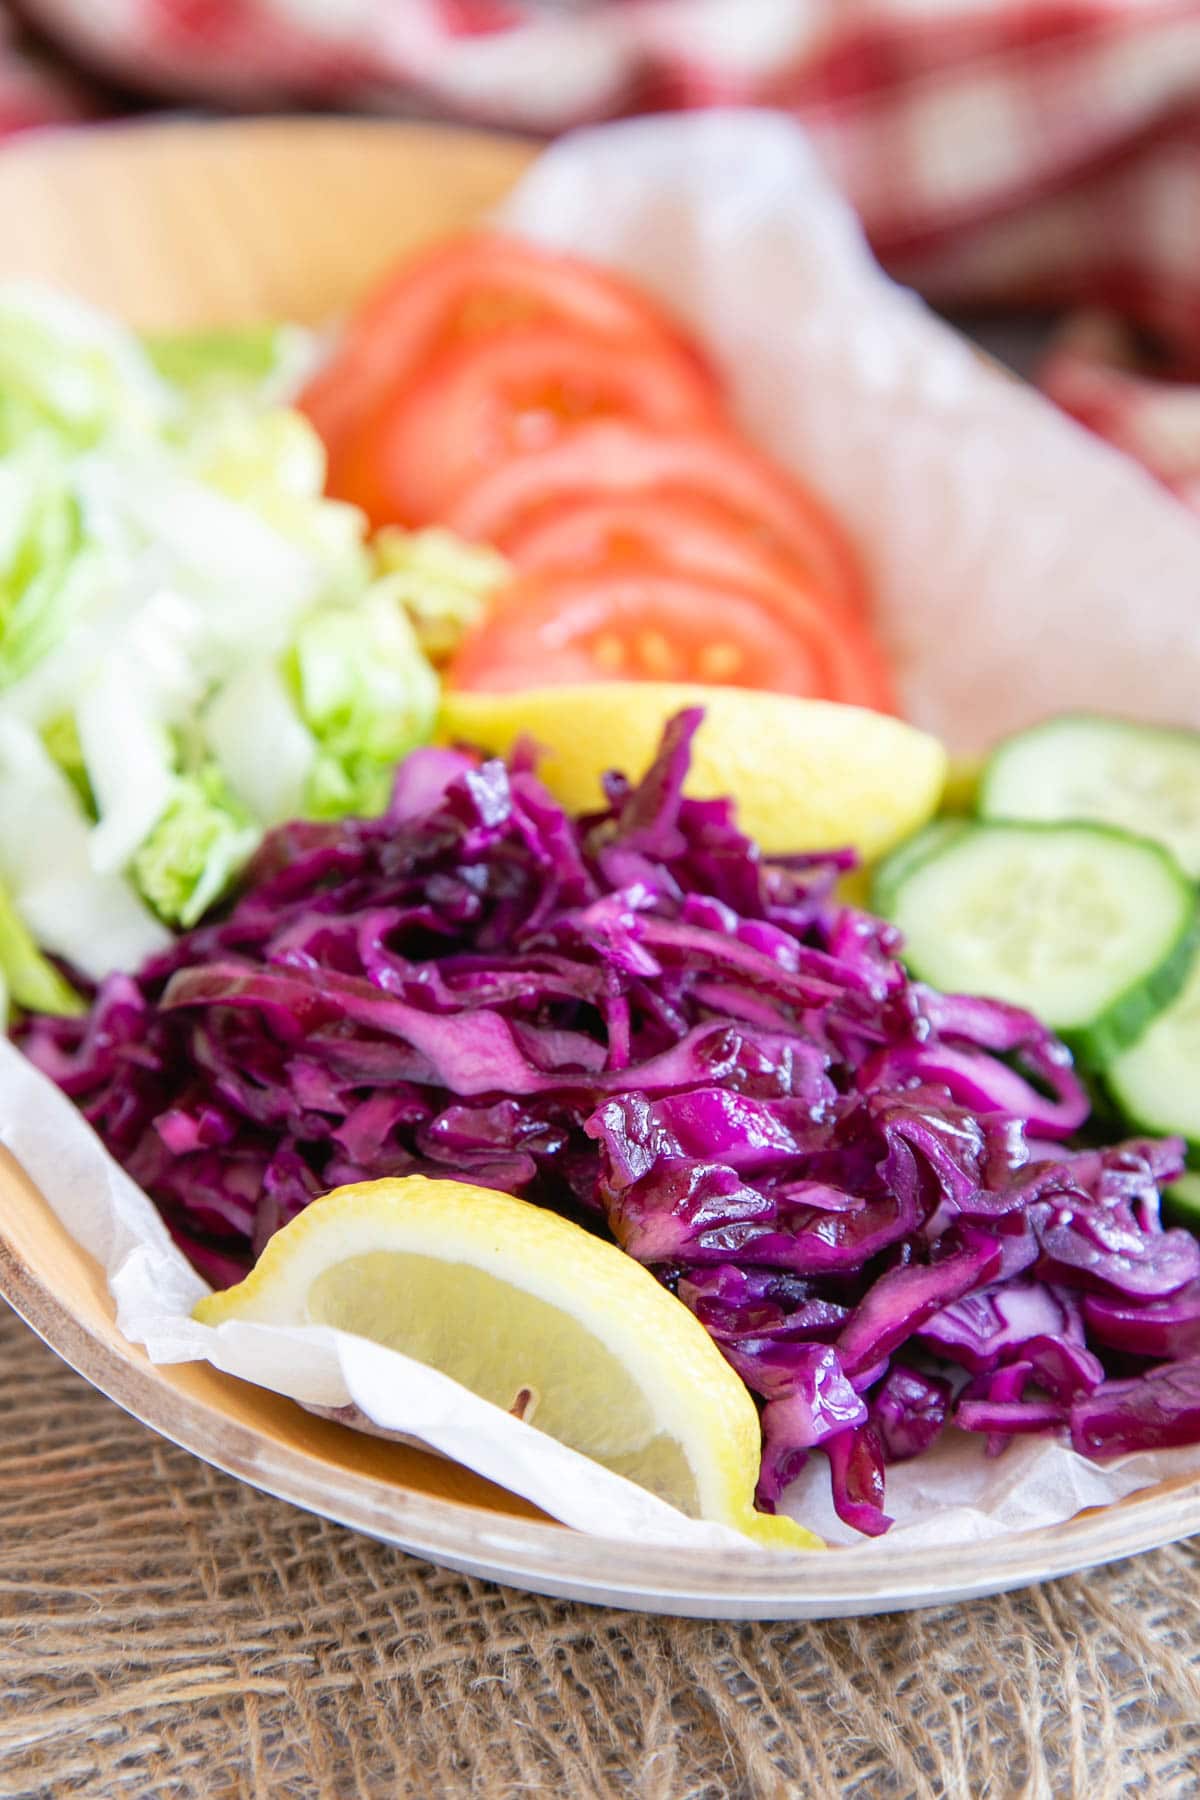 Kebab shop salad laid out on a platter - fresh and bright and tempting with red cabbage, greed and cucumber, tomatoes and lemon wedges